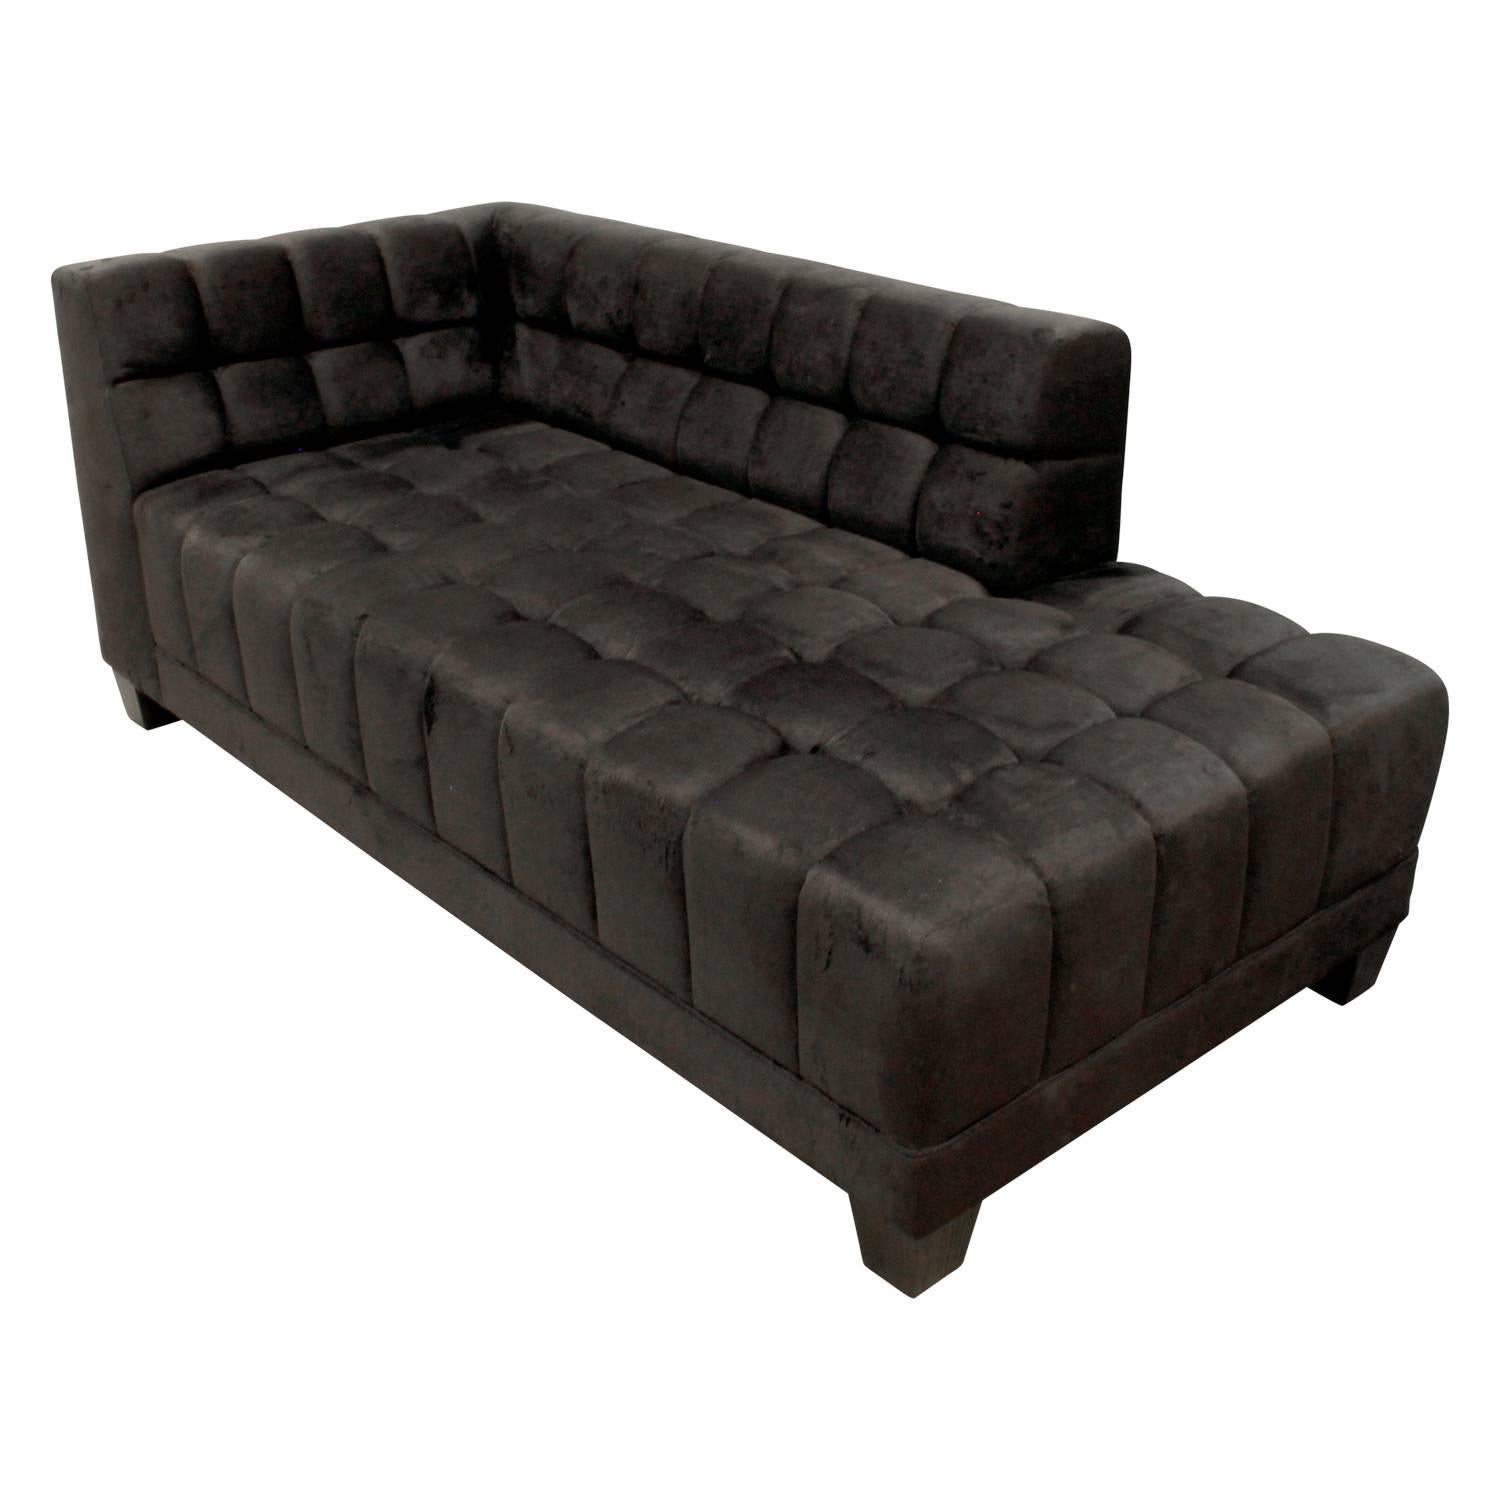 Box Tufted Chaise with left arm, both arm and back are uniformly tufted. Made to order with solid mahogany legs which can be finished in a choice of colors, by Lobel Originals / COM. This chaise is handcrafted.